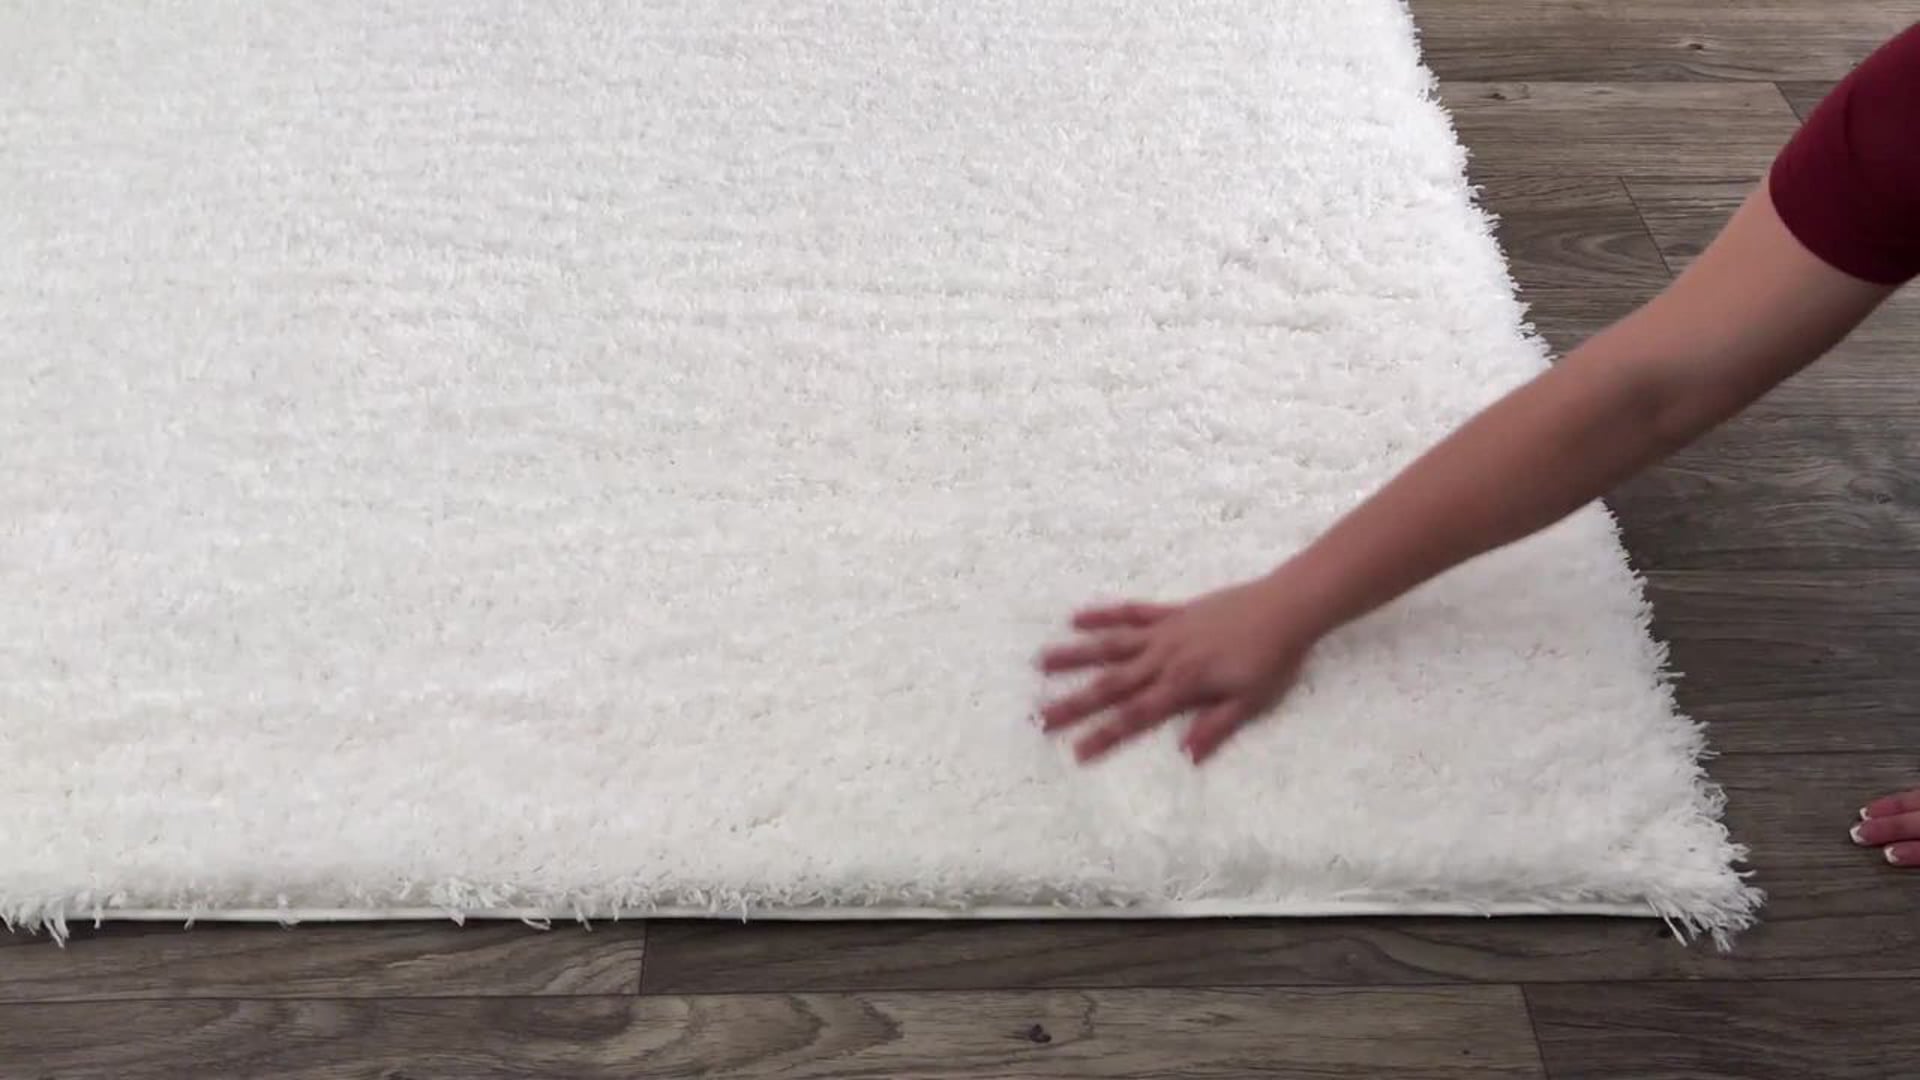 Soft and Plush Cloudy Solid Shag Rug, Snow White, 9'2"x12'